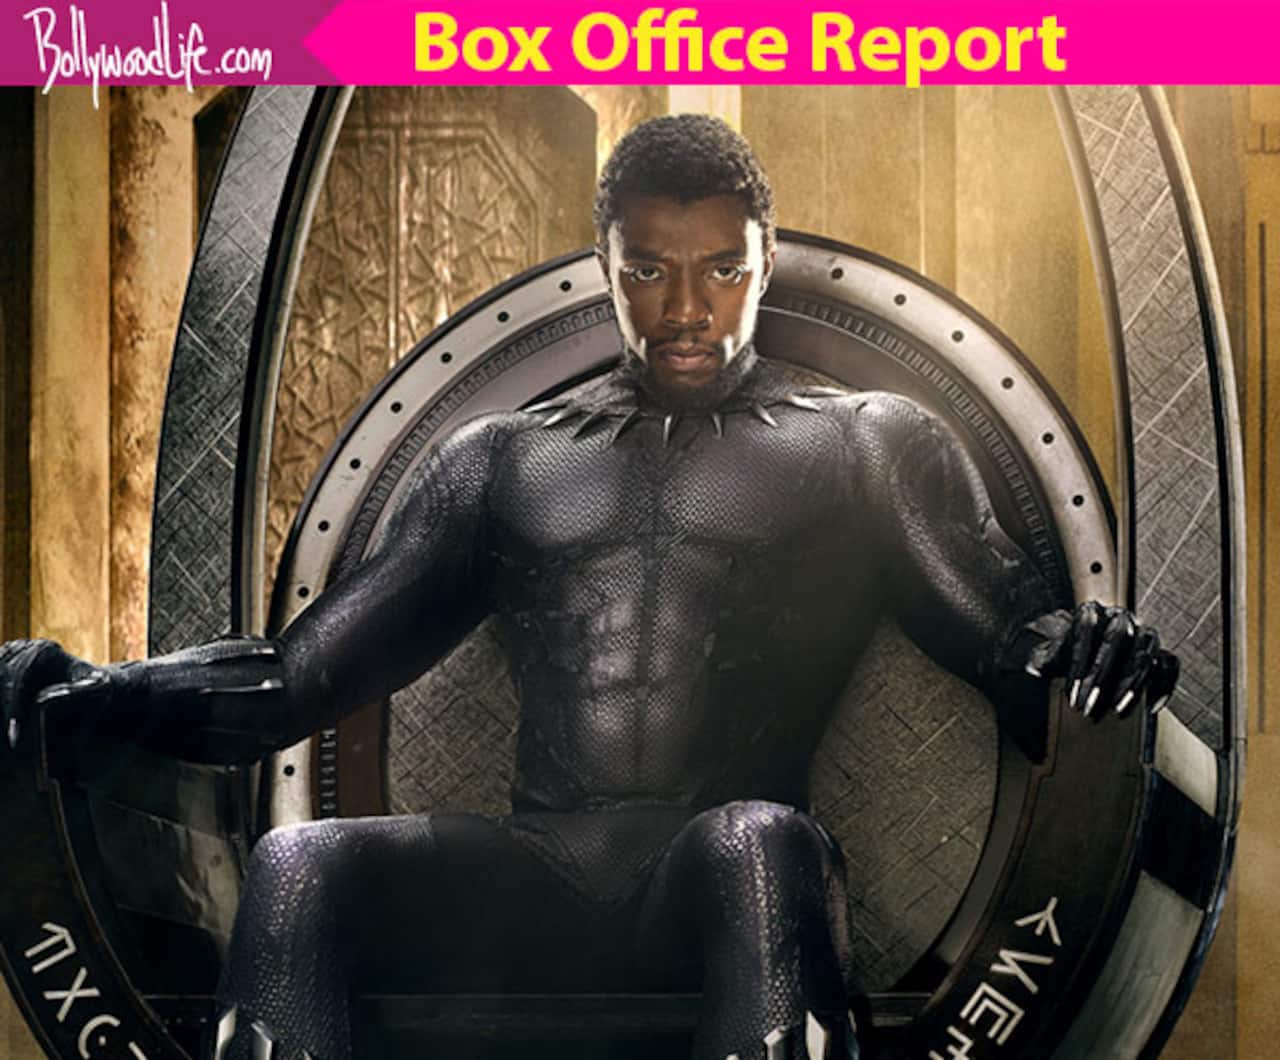 Black Panther box office collection day 4: Marvel's superhero film nears  the $450 million mark in the worldwide market - Bollywood News & Gossip,  Movie Reviews, Trailers & Videos at 